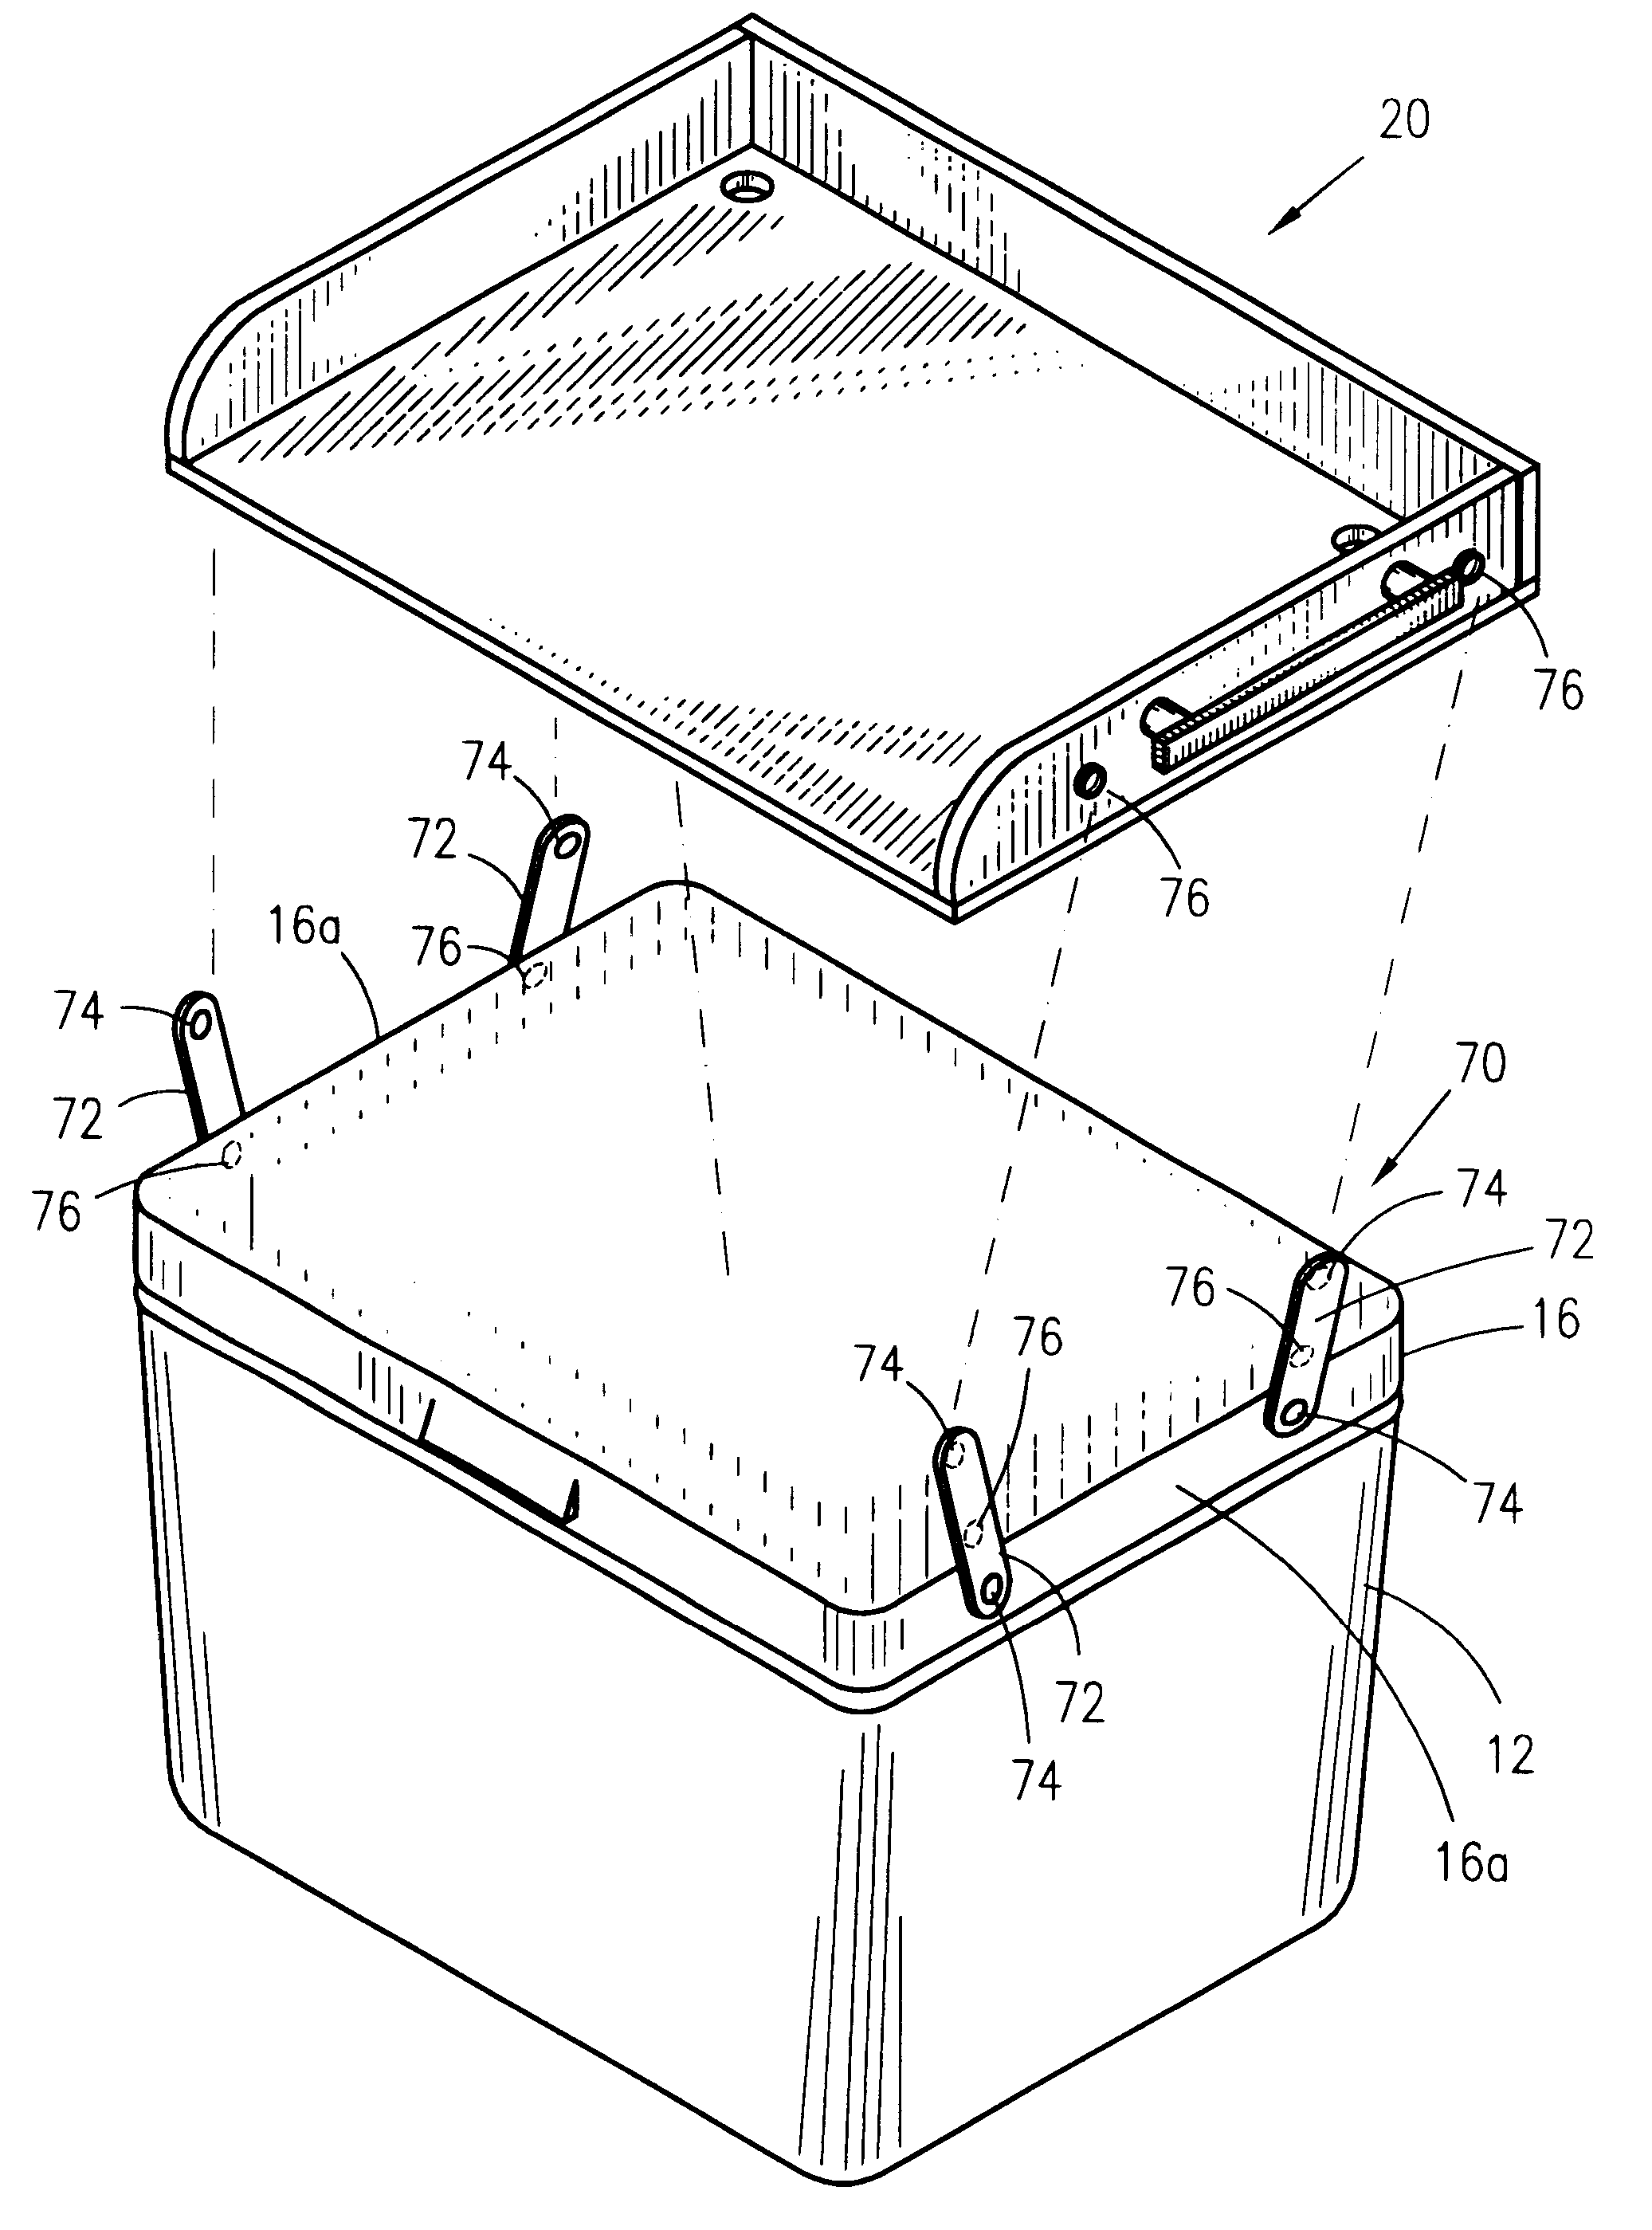 Cutting and fillet board with drain for removable attachment to conventional ice chest coolers